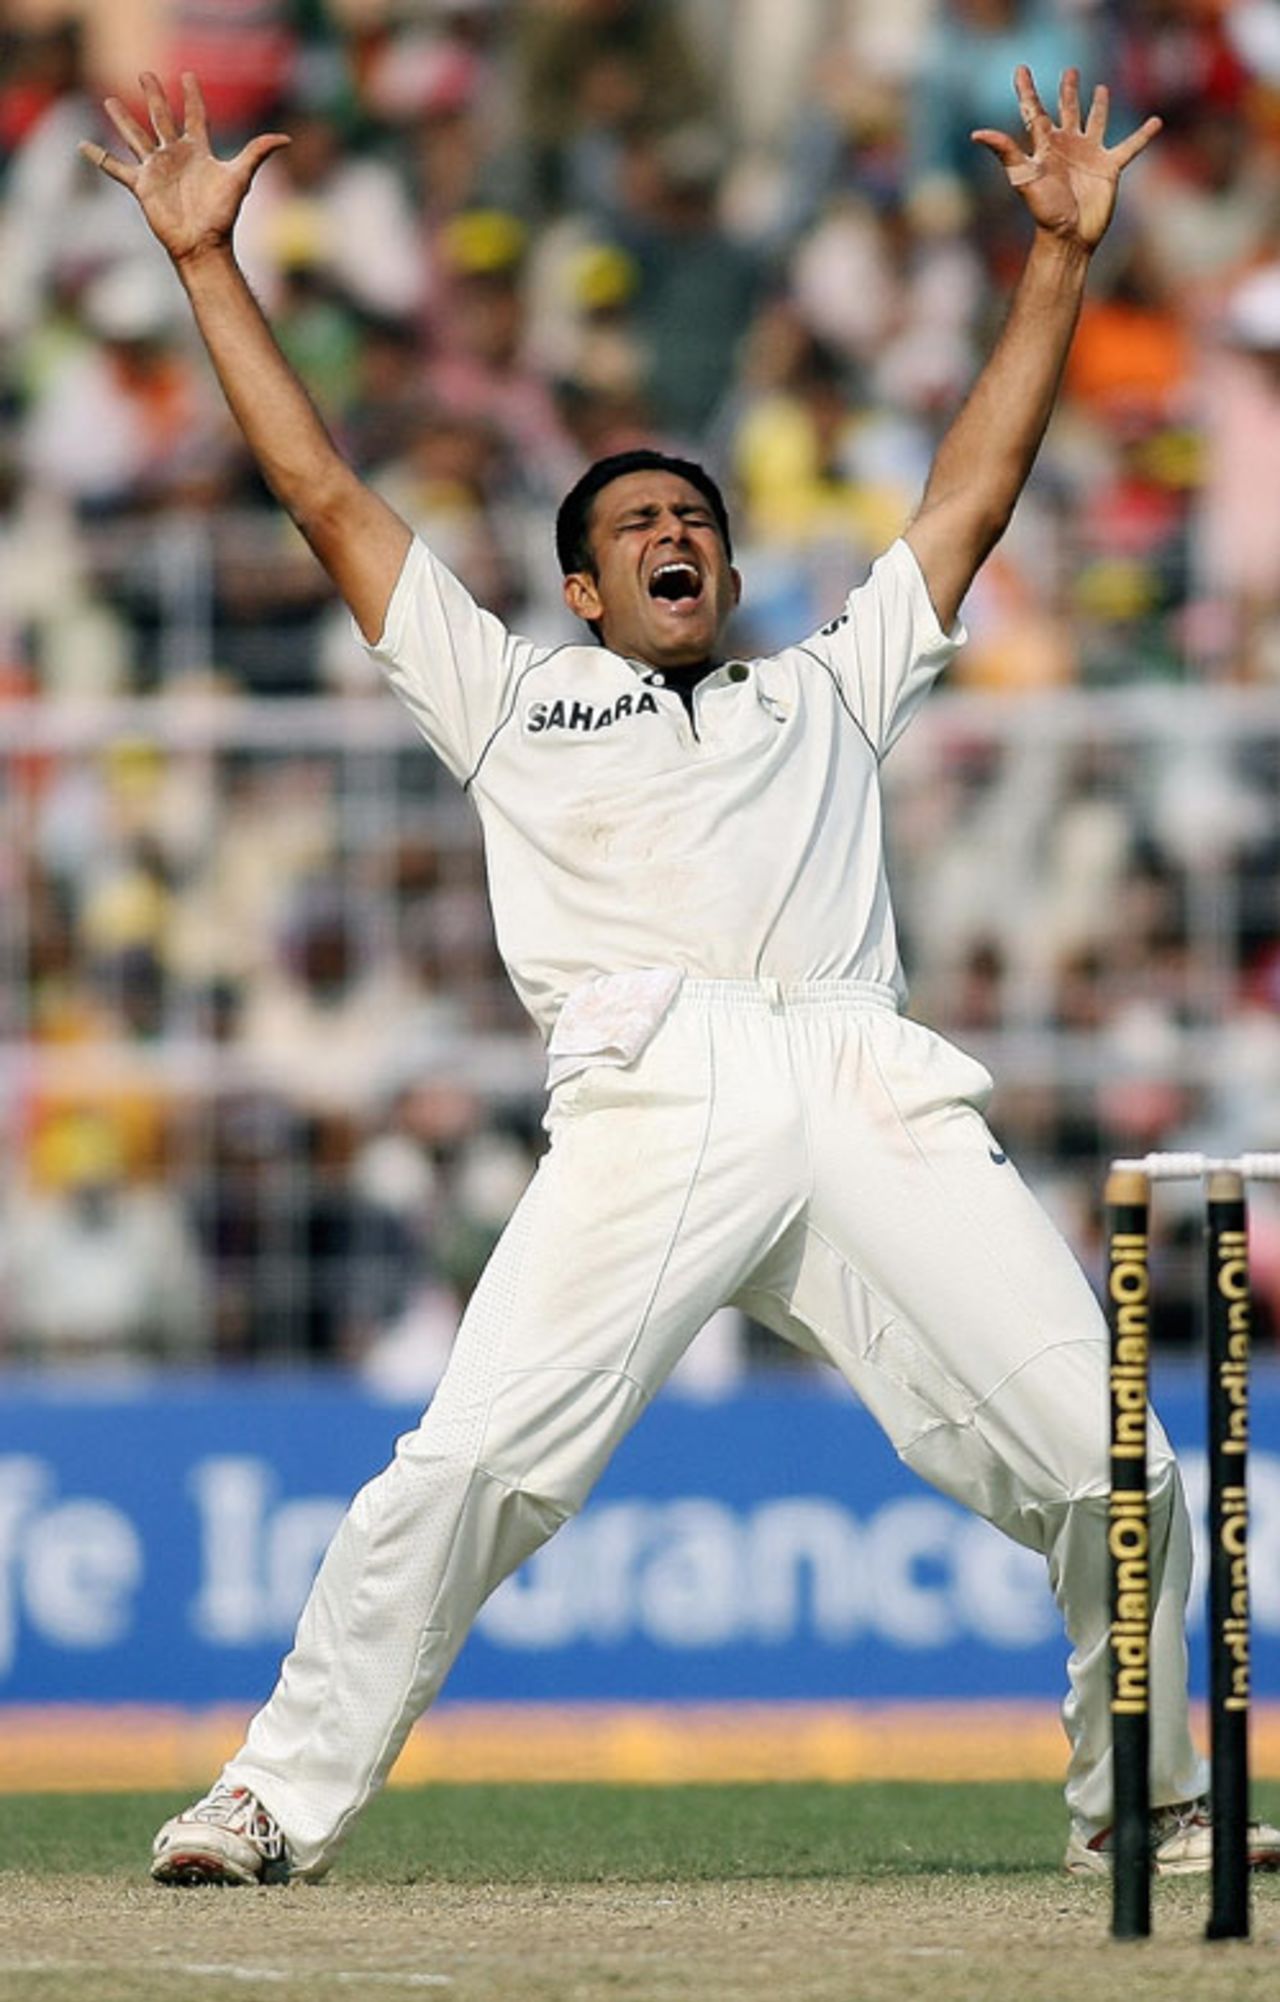 Anil Kumble can't contain himself after winning an lbw verdict against Salman Butt, India v Pakistan, 2nd Test, Kolkata, 5th day, December 4, 2007
